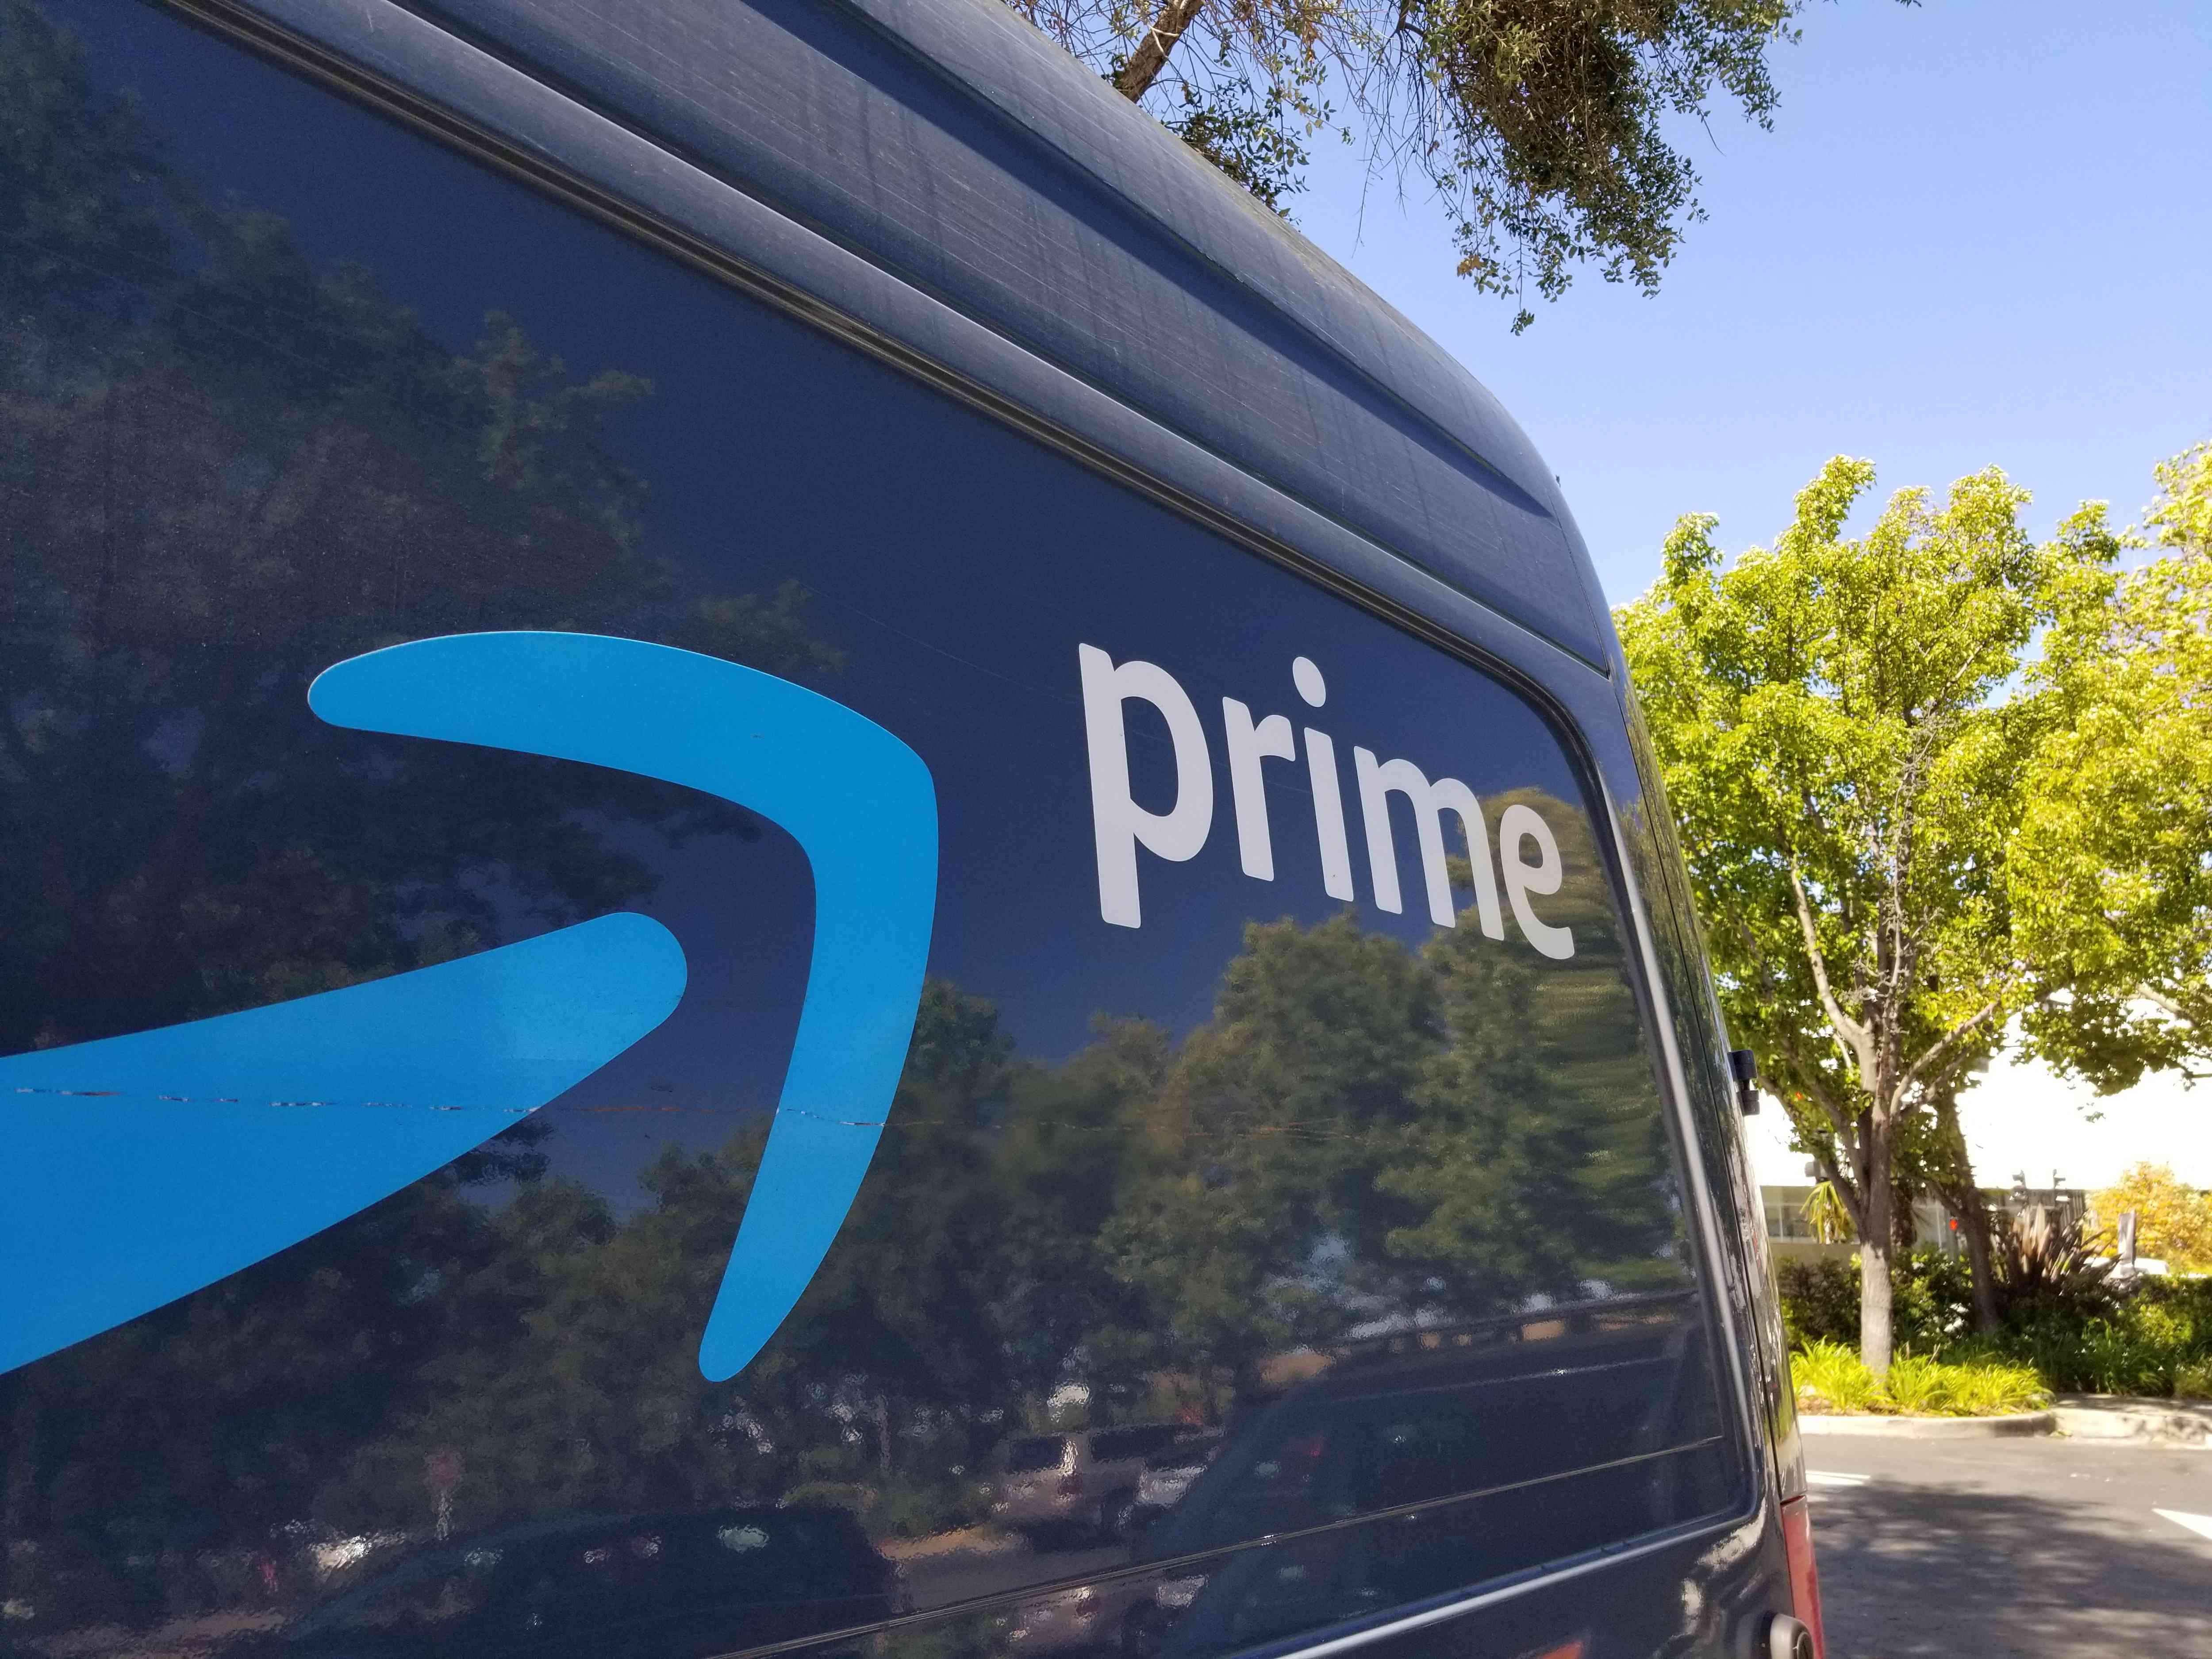 Close-up of logo for Amazon Prime service on a branded delivery truck.